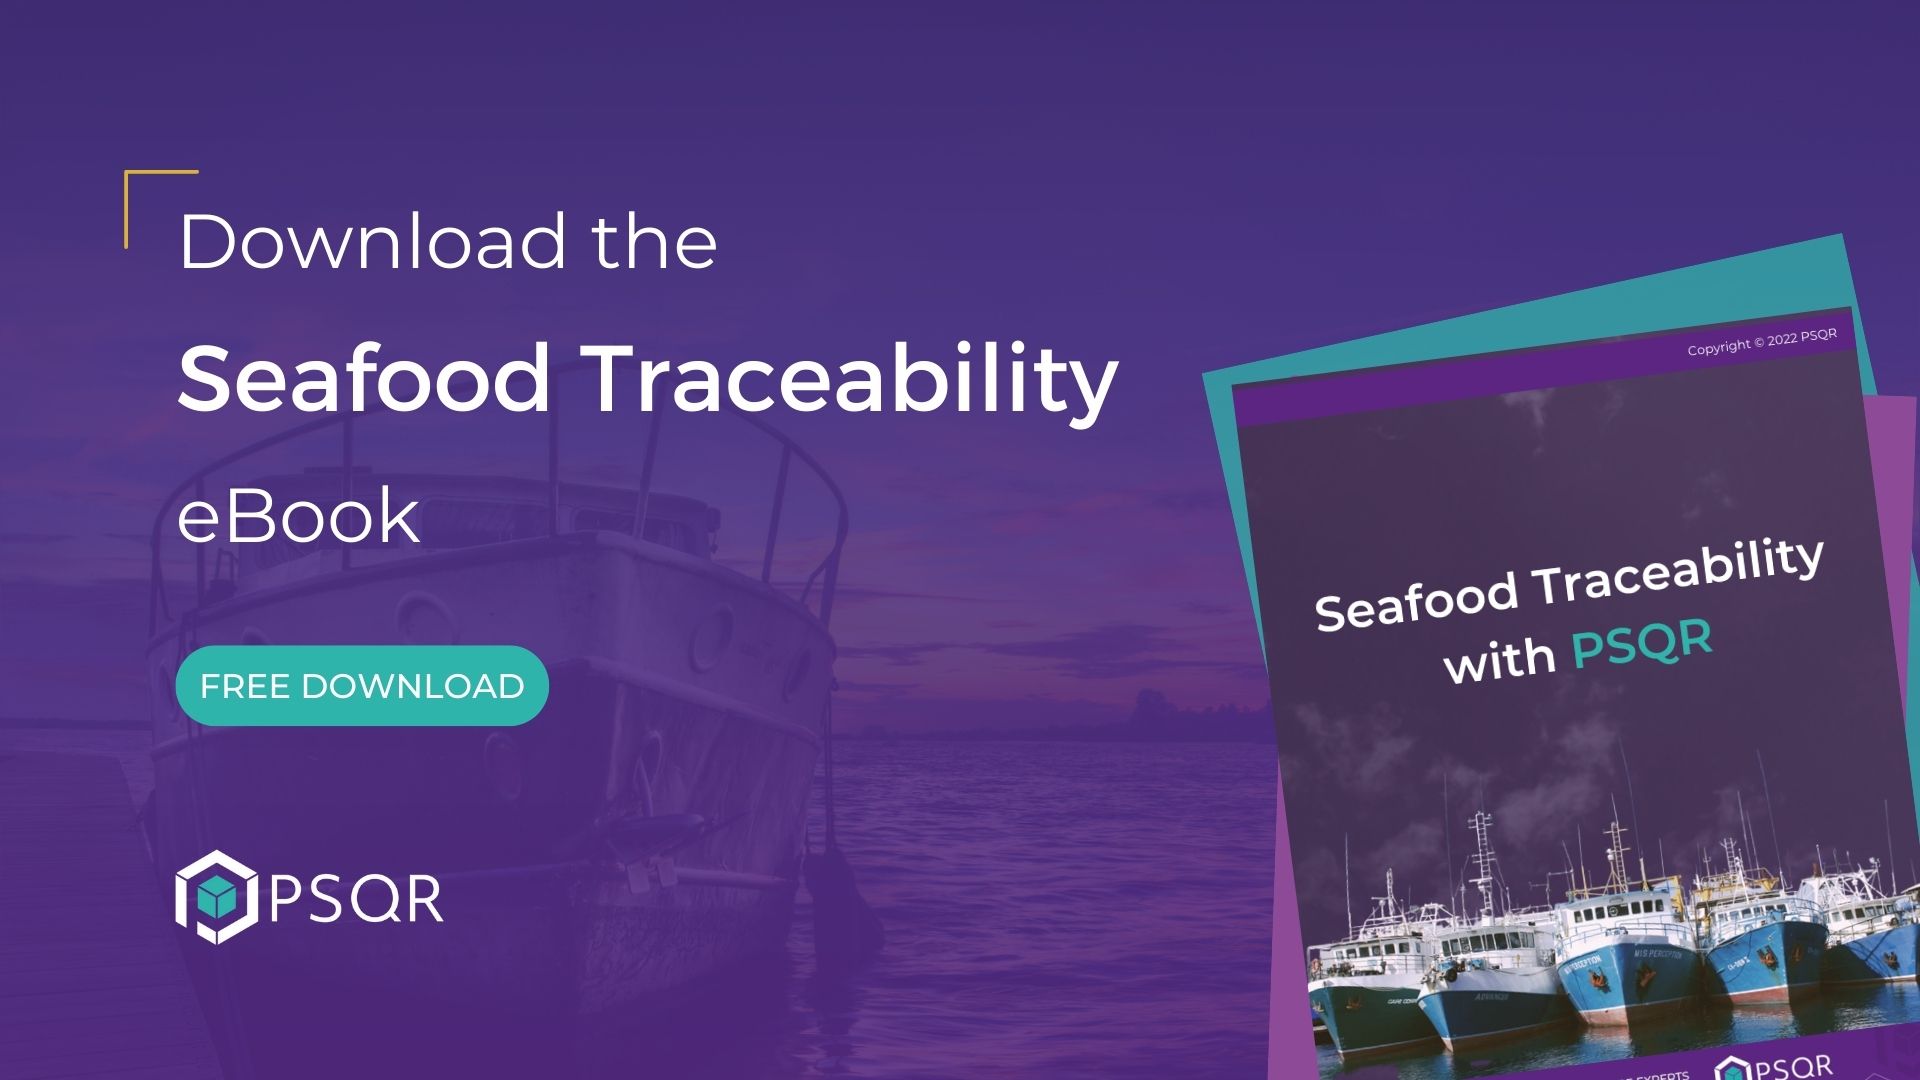 Seafood Traceability by PSQR Ebook